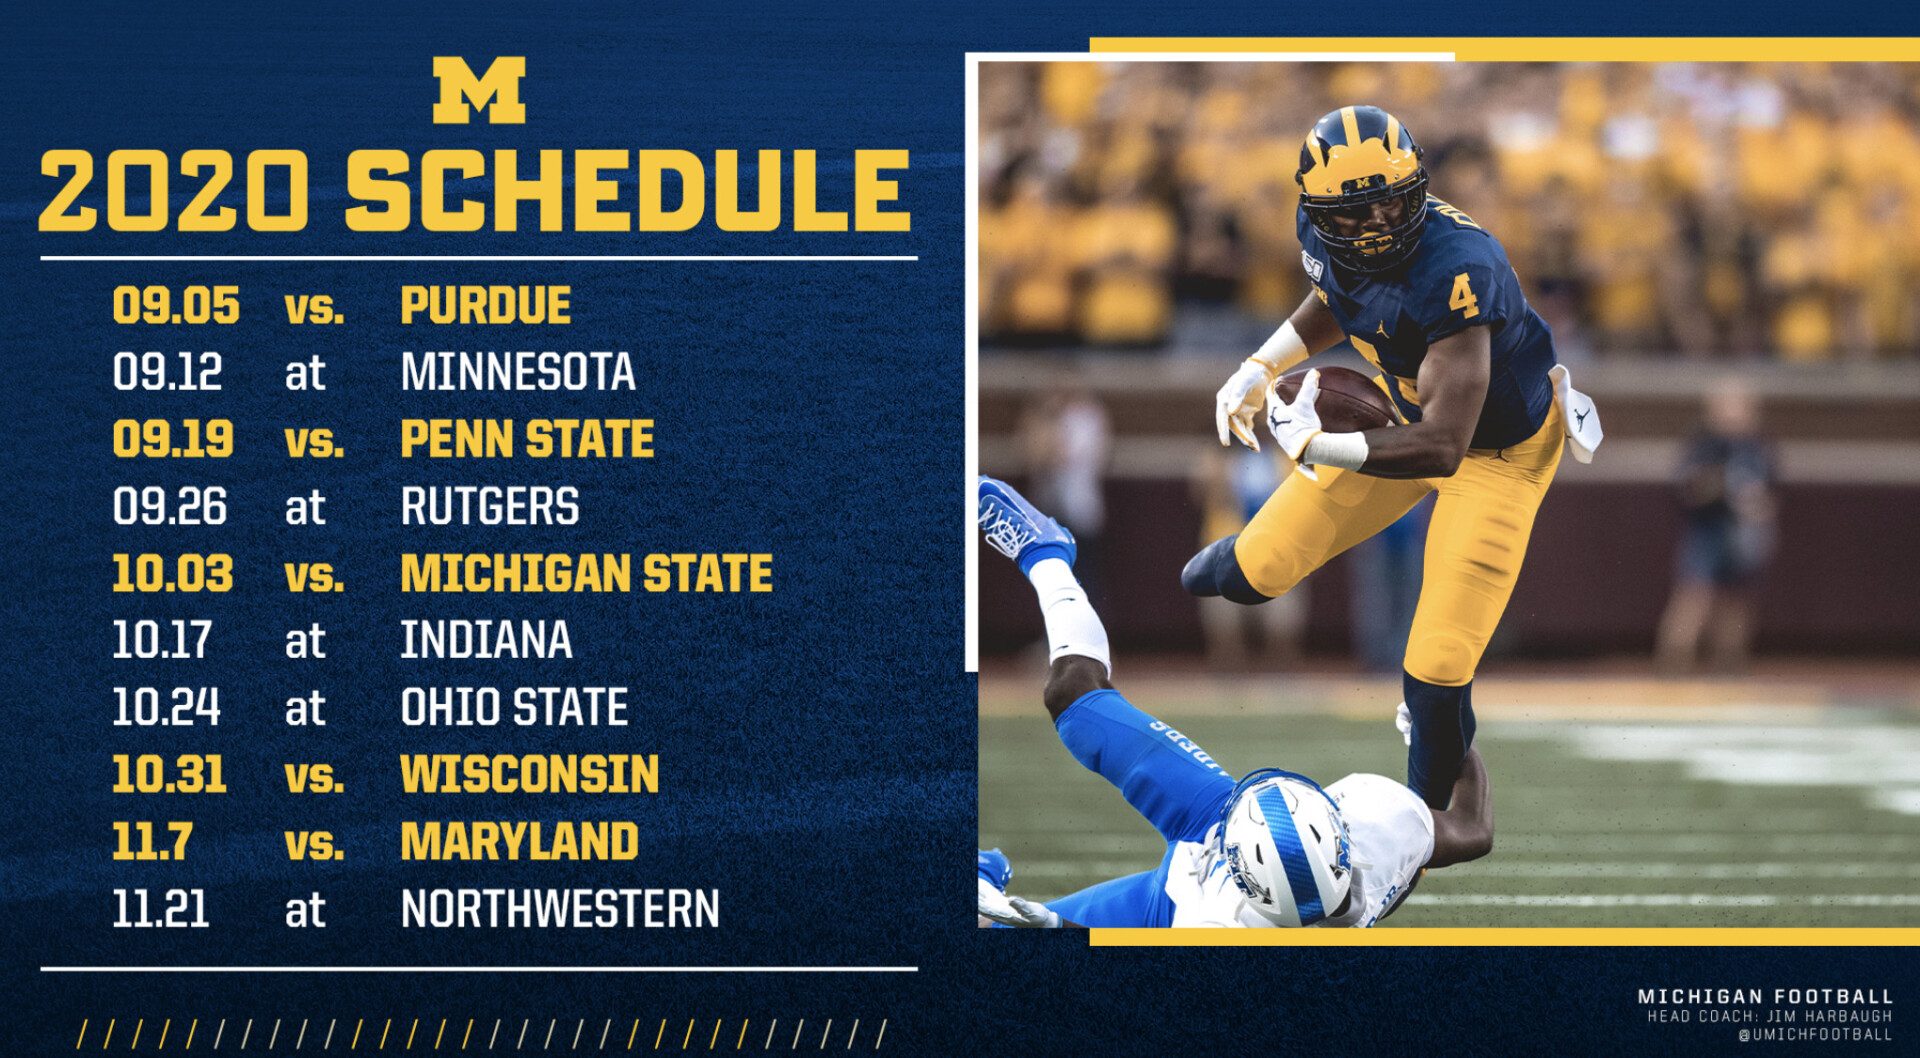 U of M: Michigan's 2020 football schedule includes October game vs. Ohio State | DSN